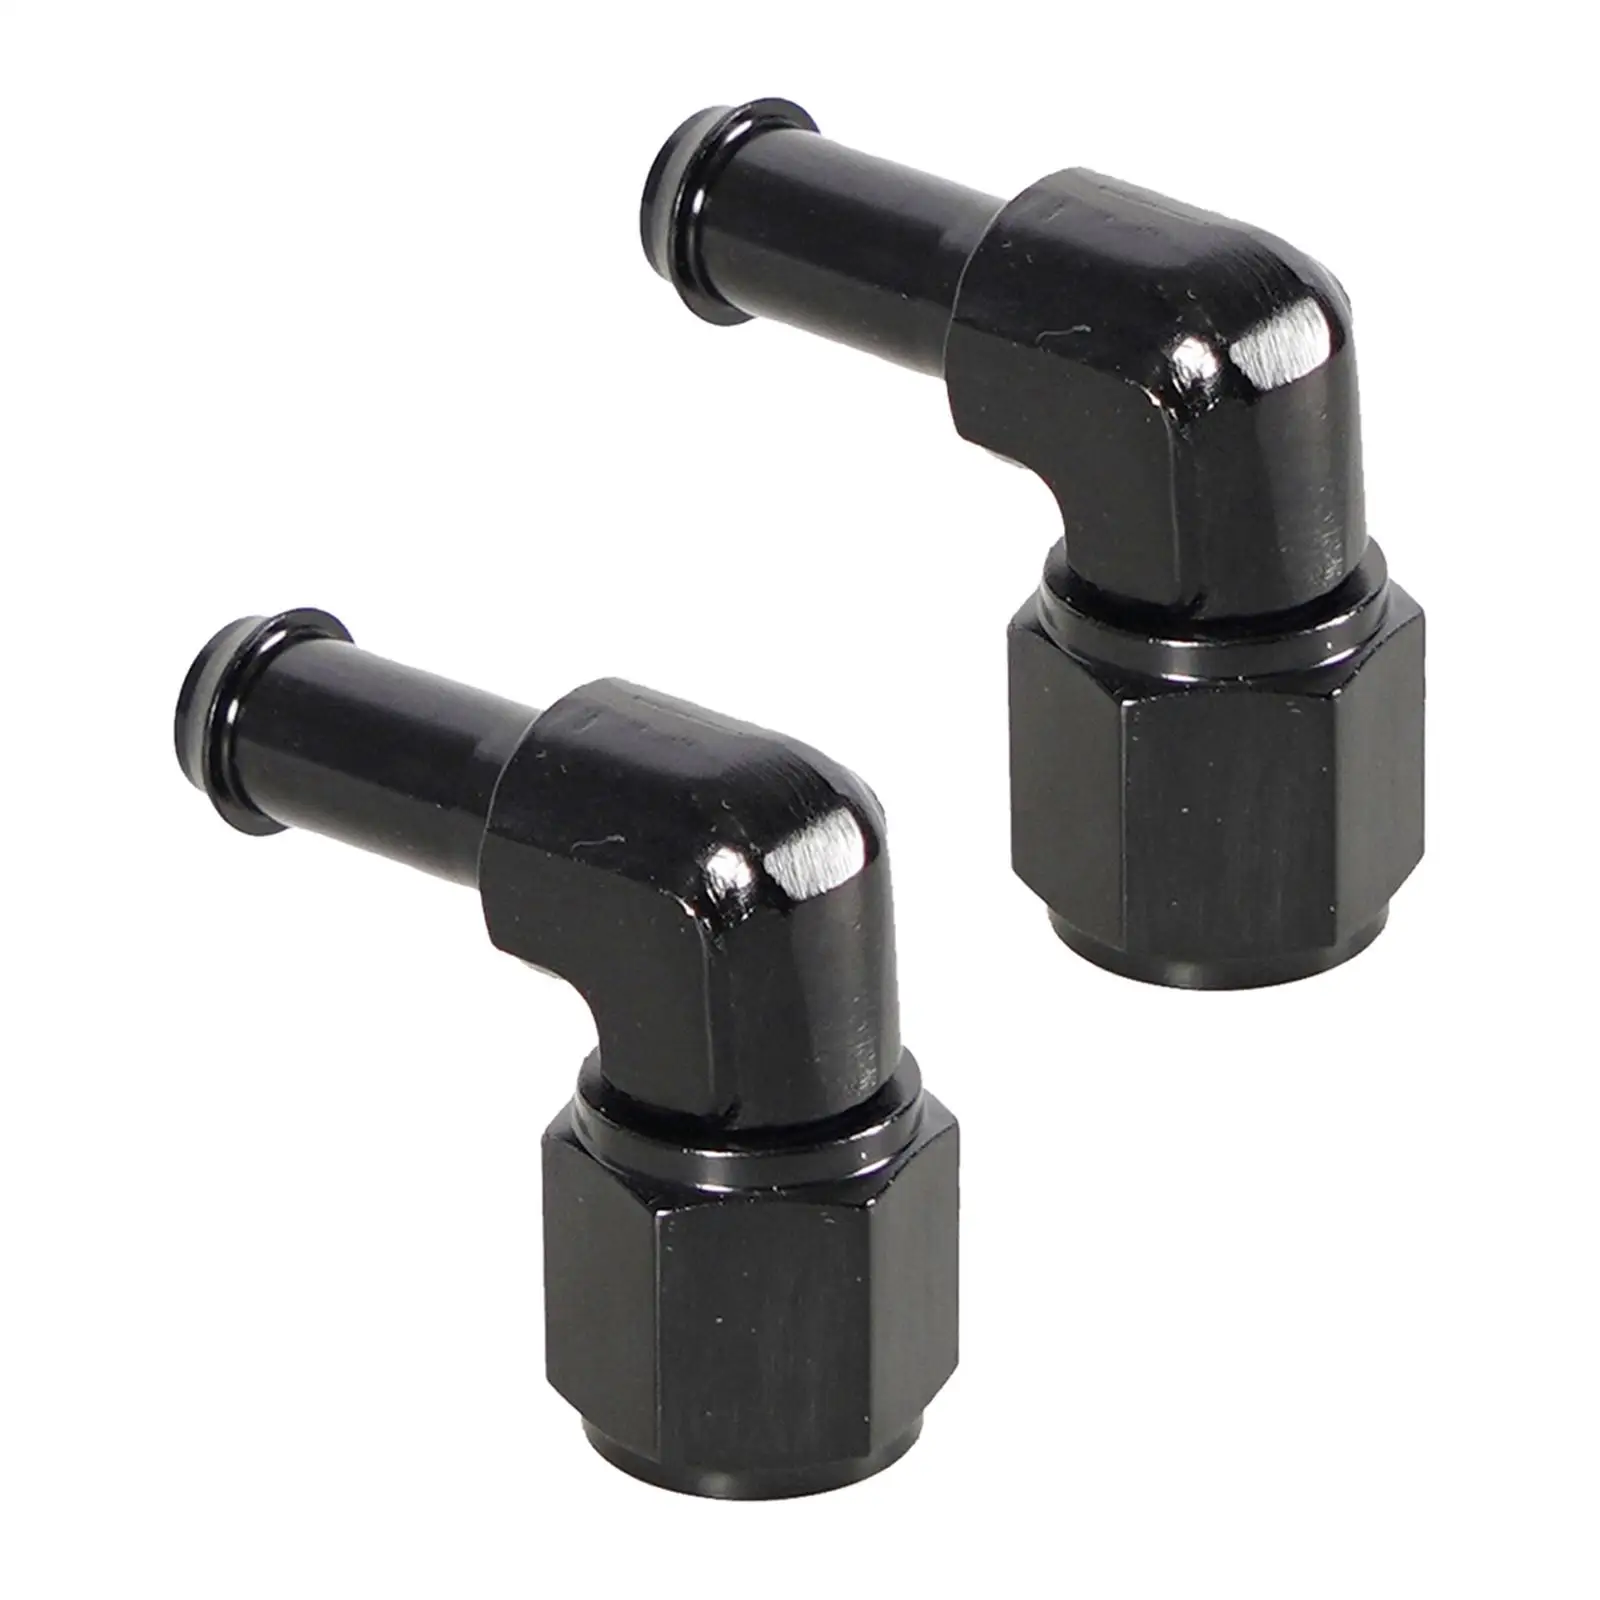 Female AN6 AN -6 Swivel Barb Fittings Adapter 90 Degree Quick Connect Aluminum Elbow Adapter Swivel Hose Fitting Black Anodized